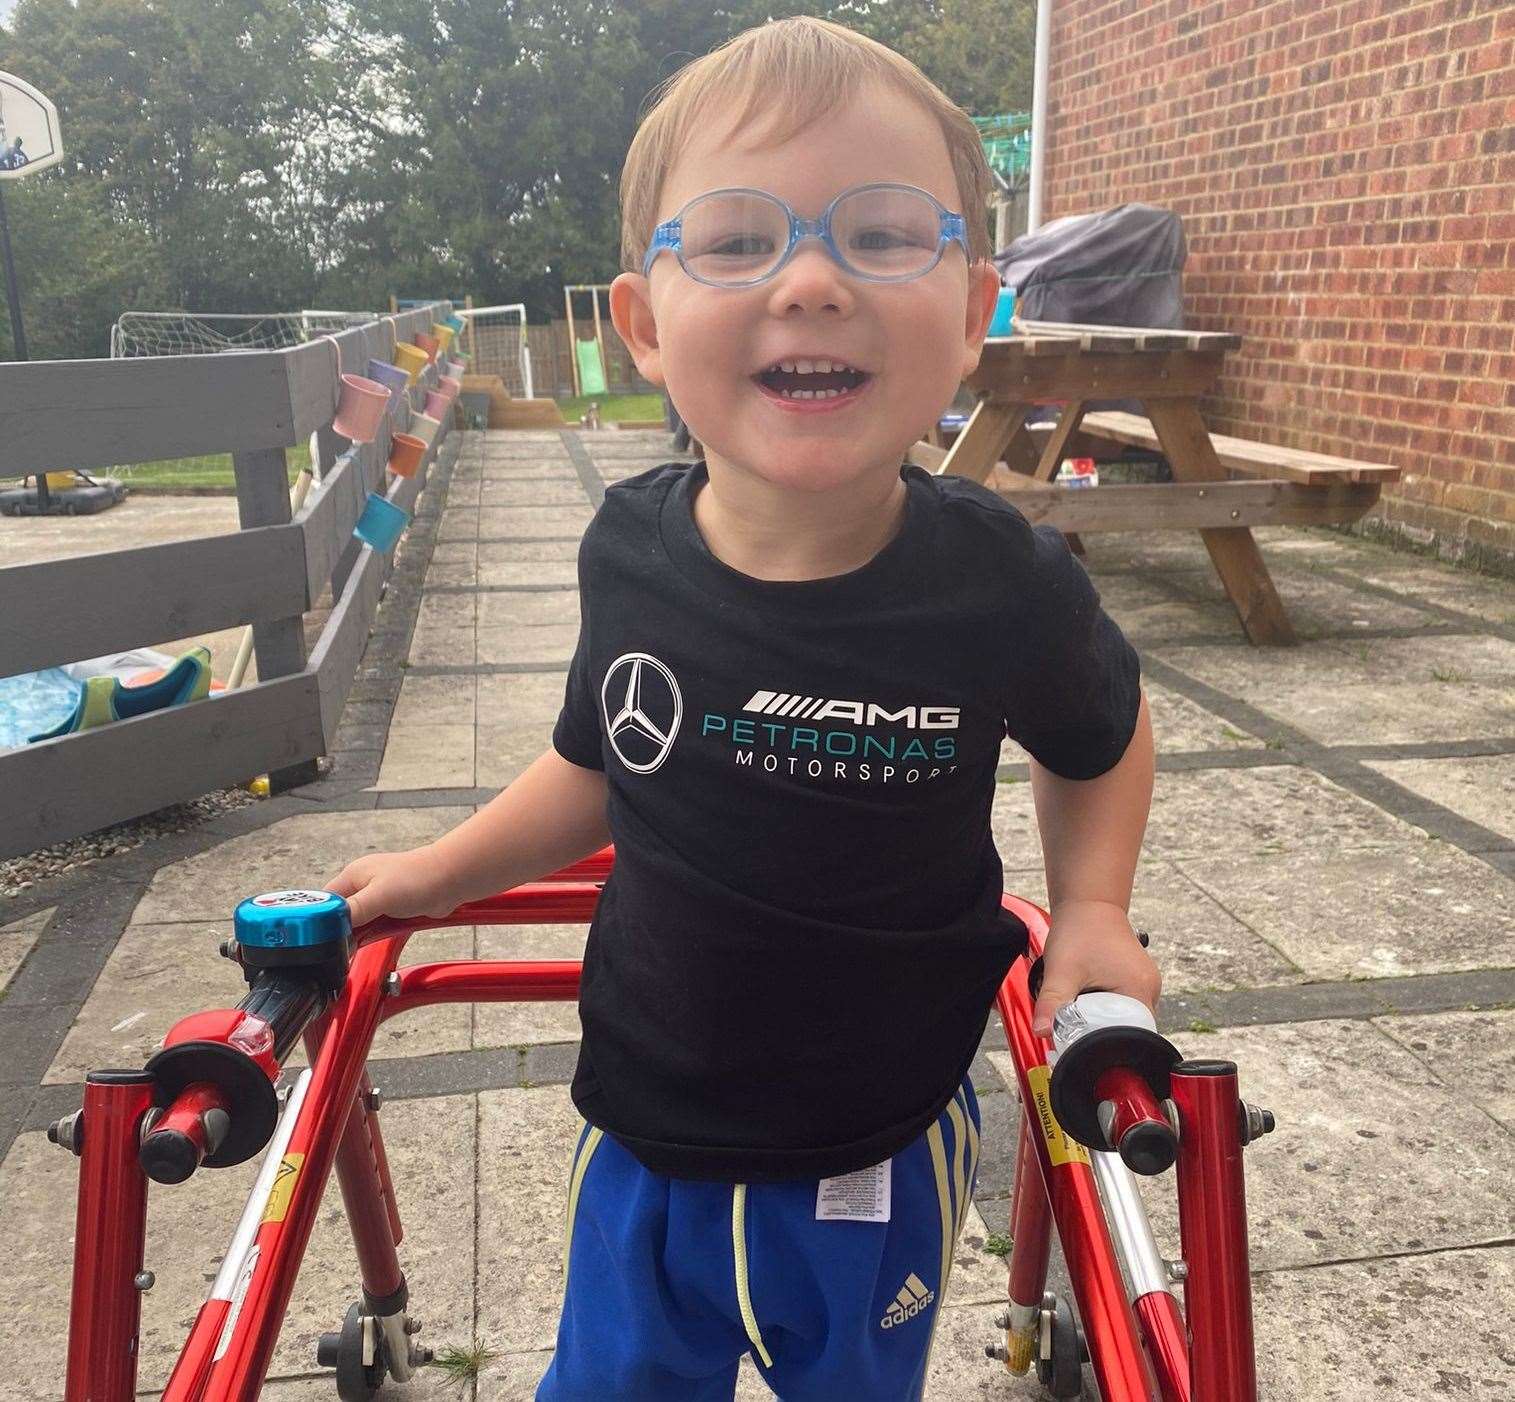 Teddy Baker, from Whitstable, was diagnosed with lower limb diplegia, which only affects his legs and impacts his ability to walk. Picture: Sarah Baker